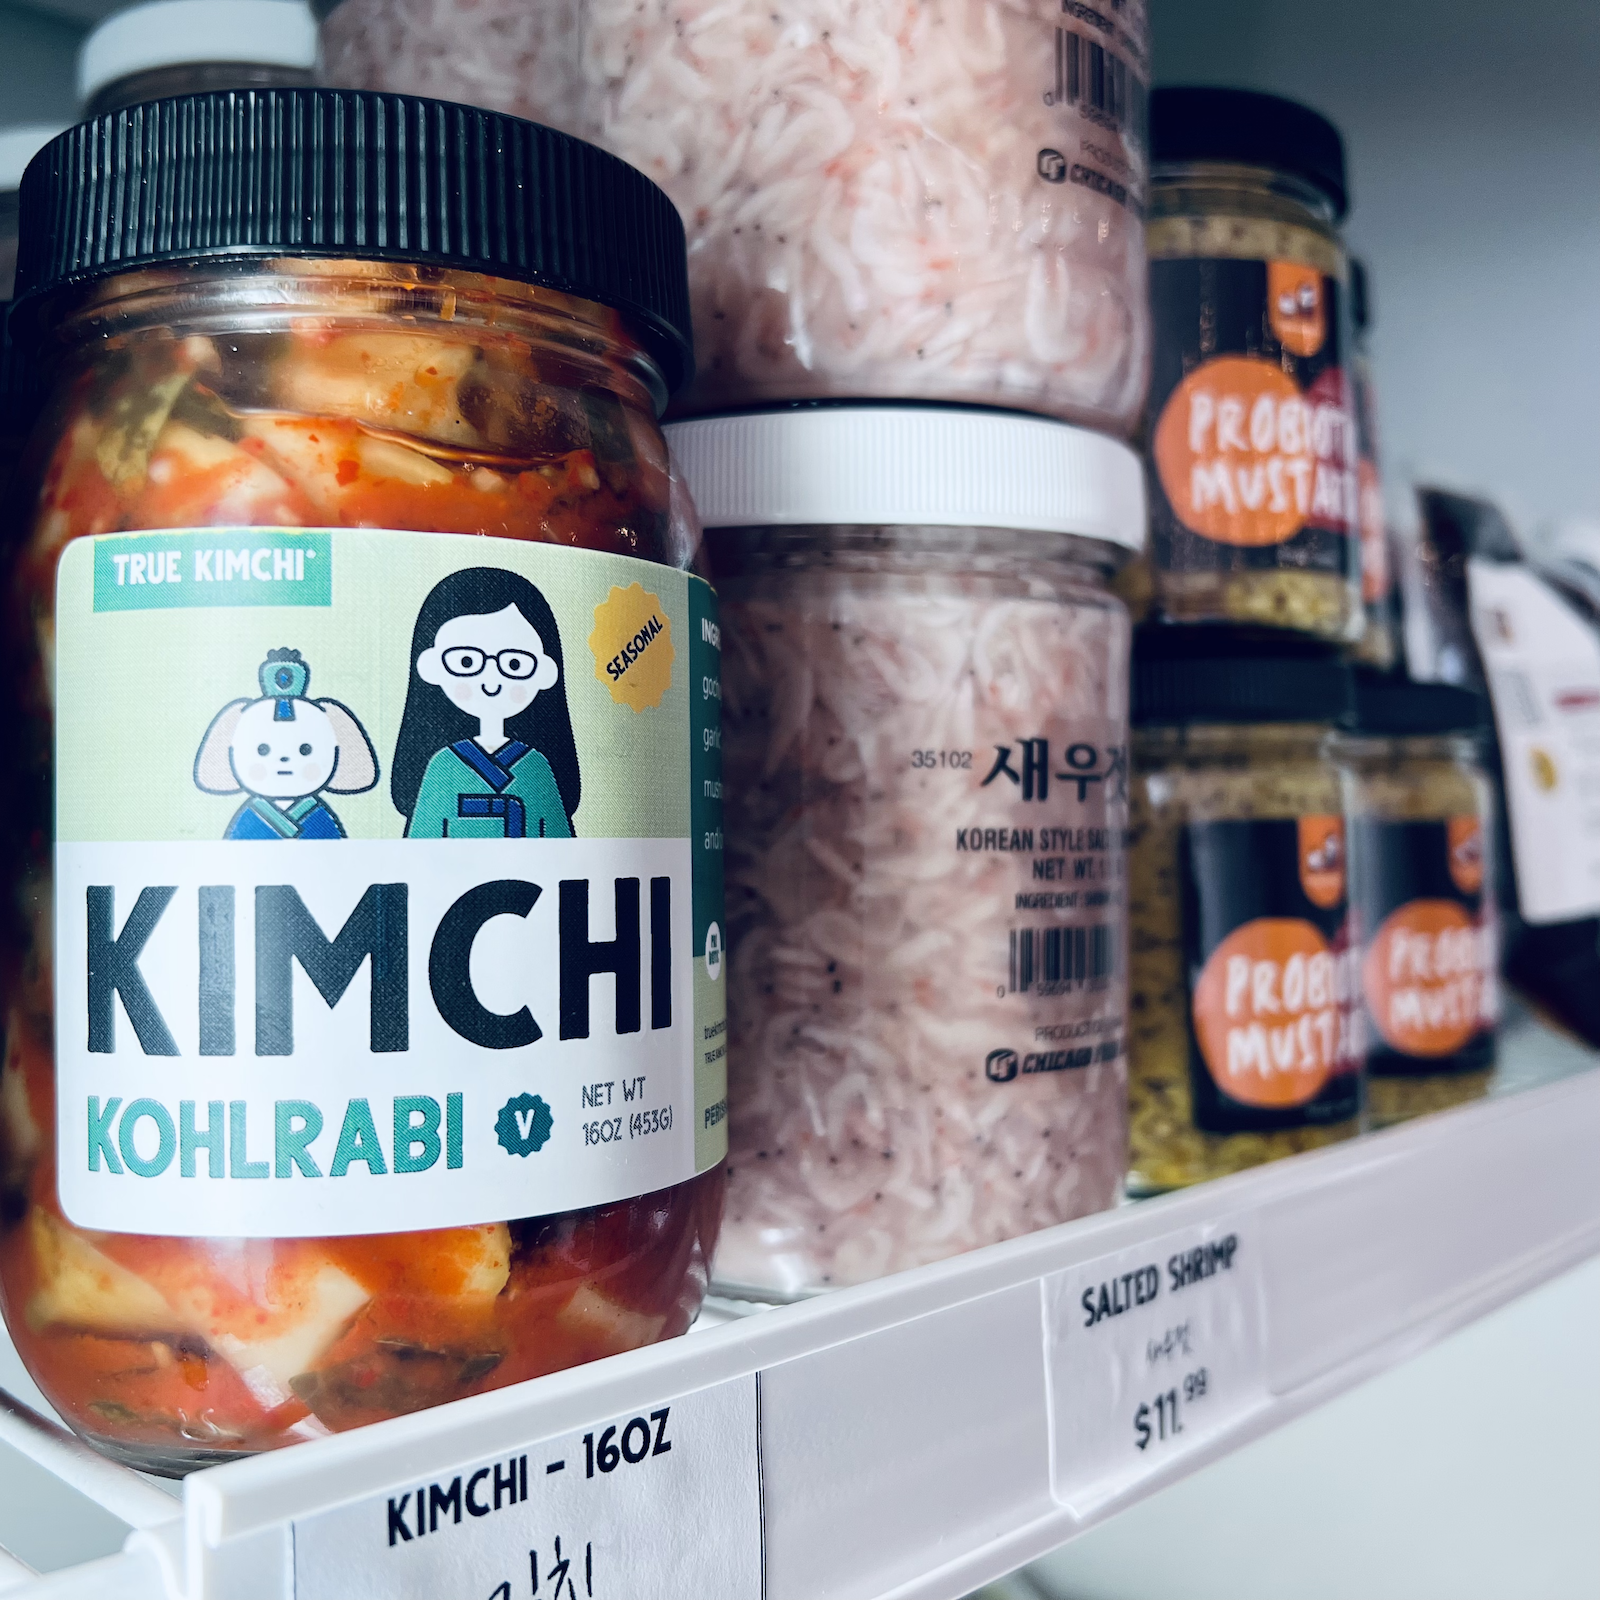 True Kimchi is expanding into a storefront cafe and Korean market at 2805 E State Blvd.